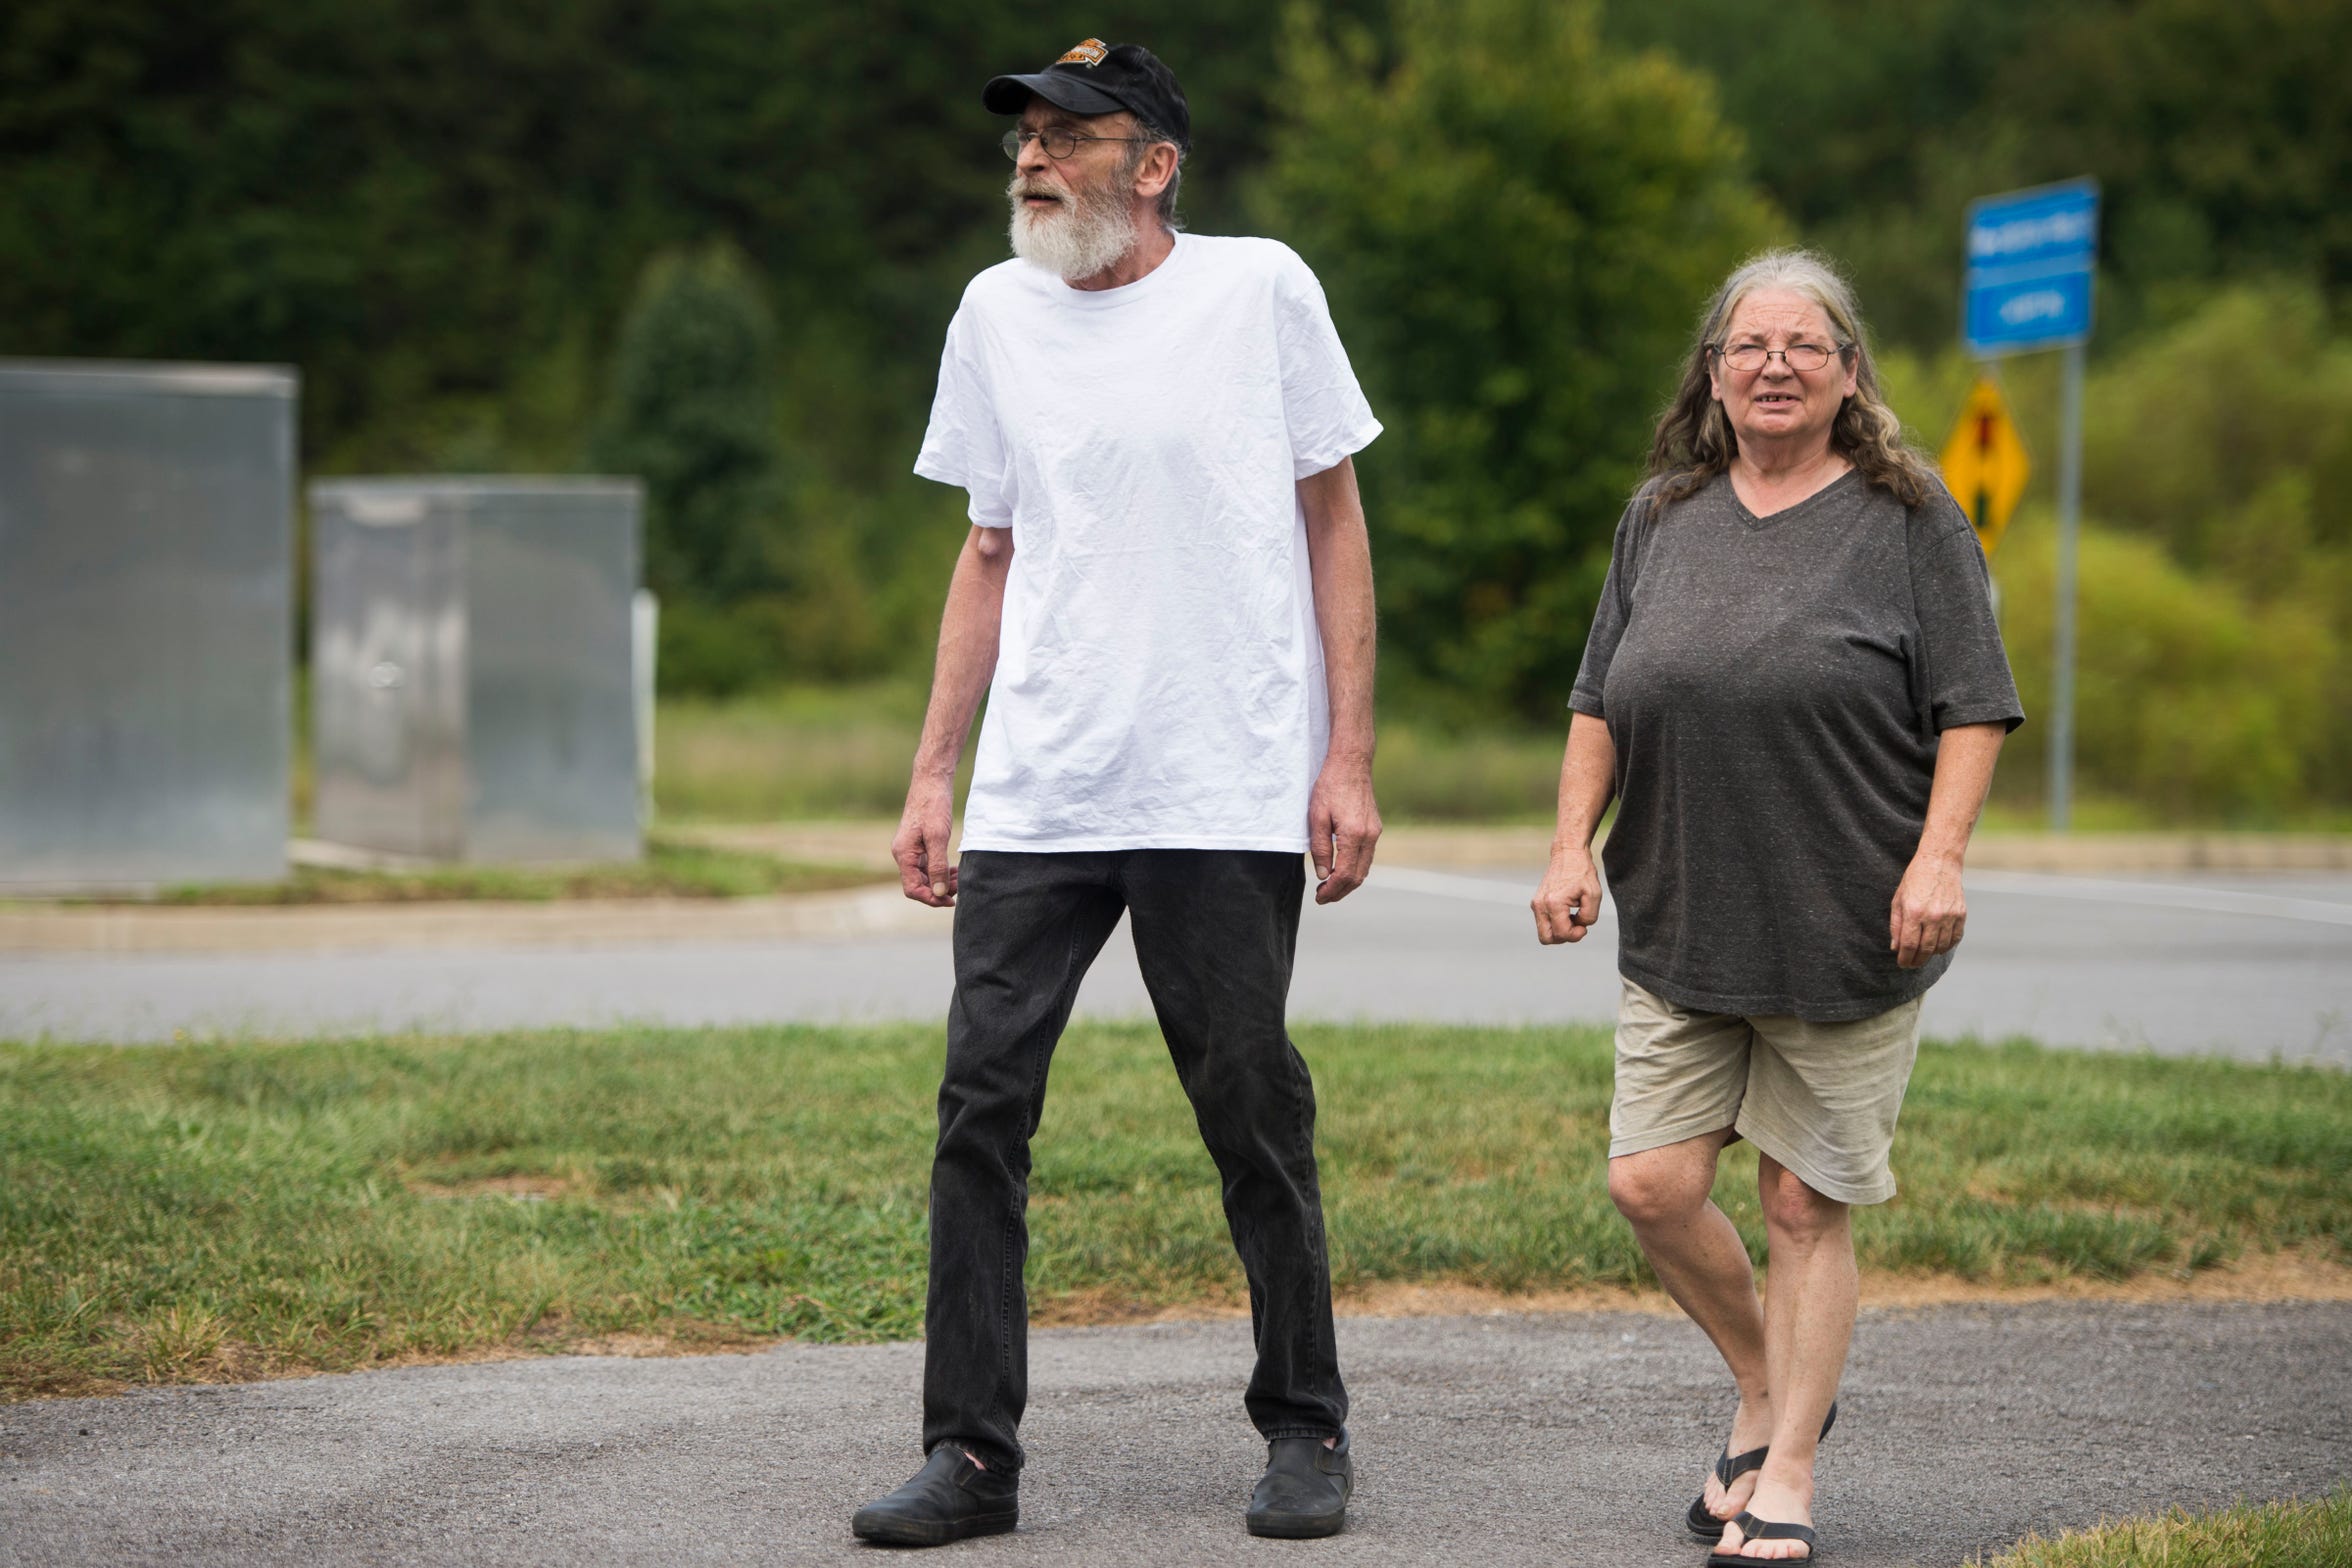 Alan Chrisman walks with his wife, Joyce, near the Sevierville, Tenn., McDonald's where he worked as a maintenance employee before being diagnosed with stage 4 colorectal cancer. Chrisman applied for disability but was initially denied based on a recommendation by a medical contractor hired by the state to review claims.